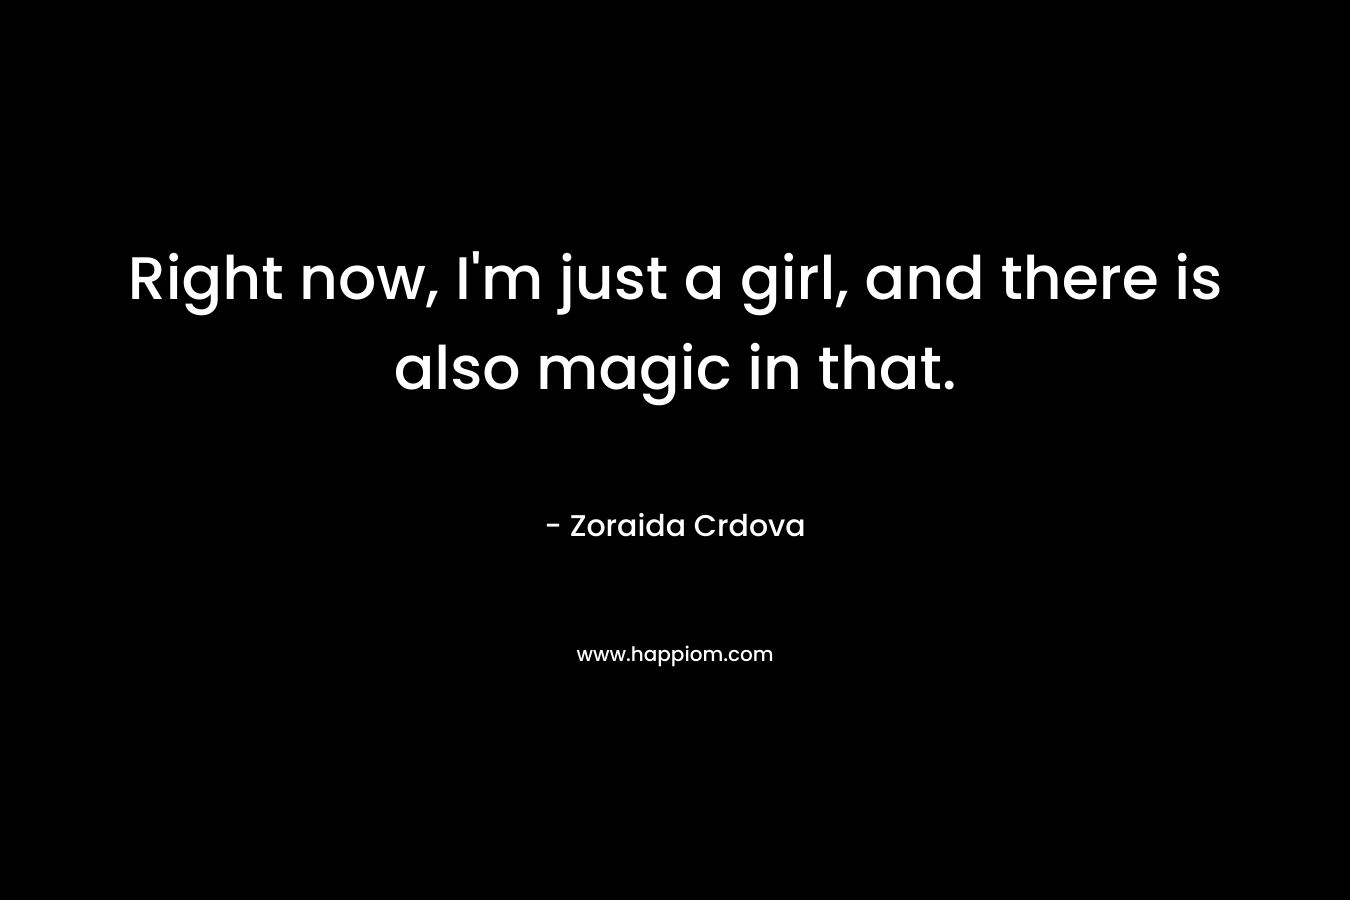 Right now, I’m just a girl, and there is also magic in that. – Zoraida Crdova